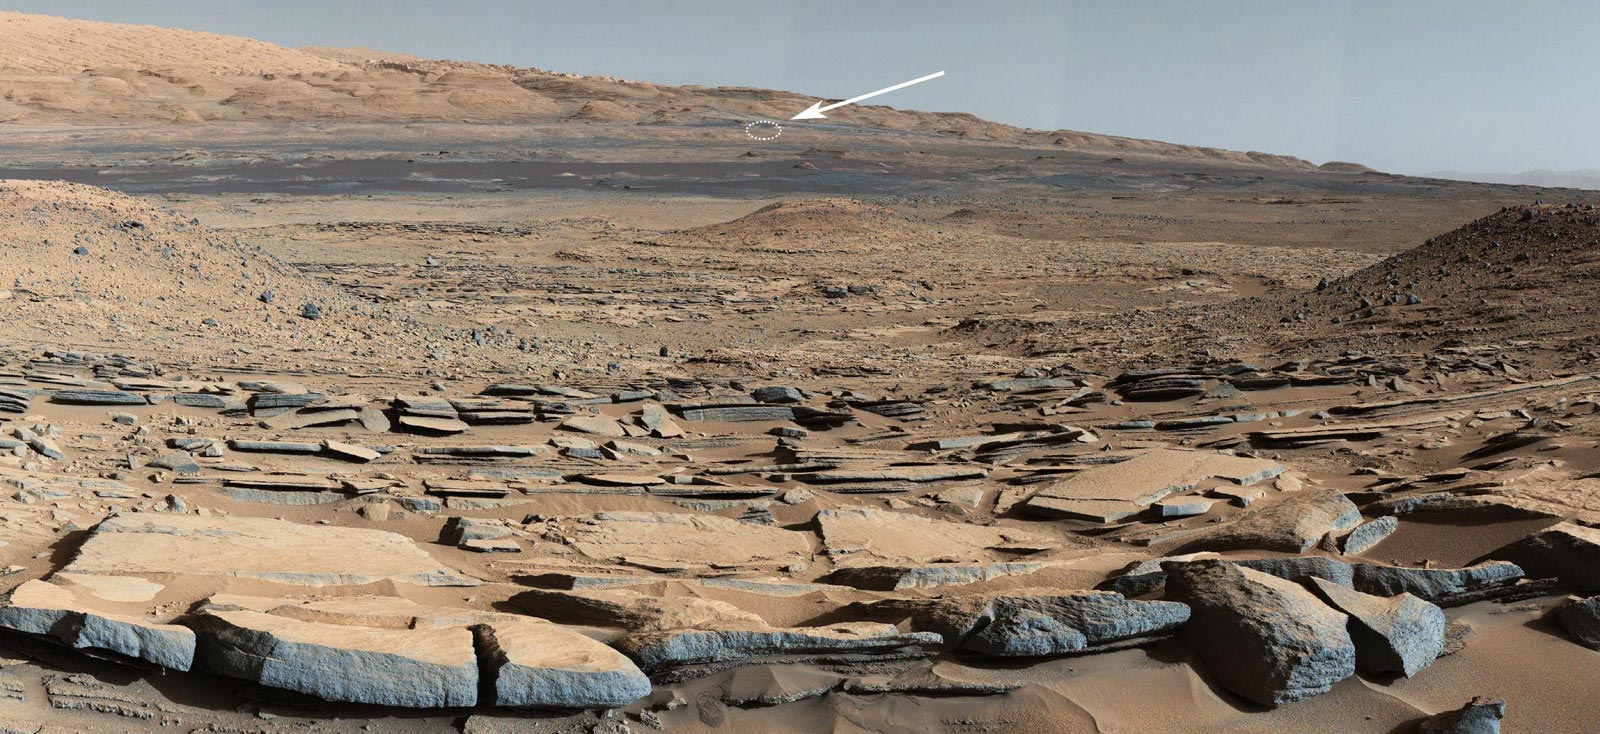 8 Thrilling Martian Postcards to Celebrate NASA Curiosity Mars Rover's Anniversary - SciTechDaily